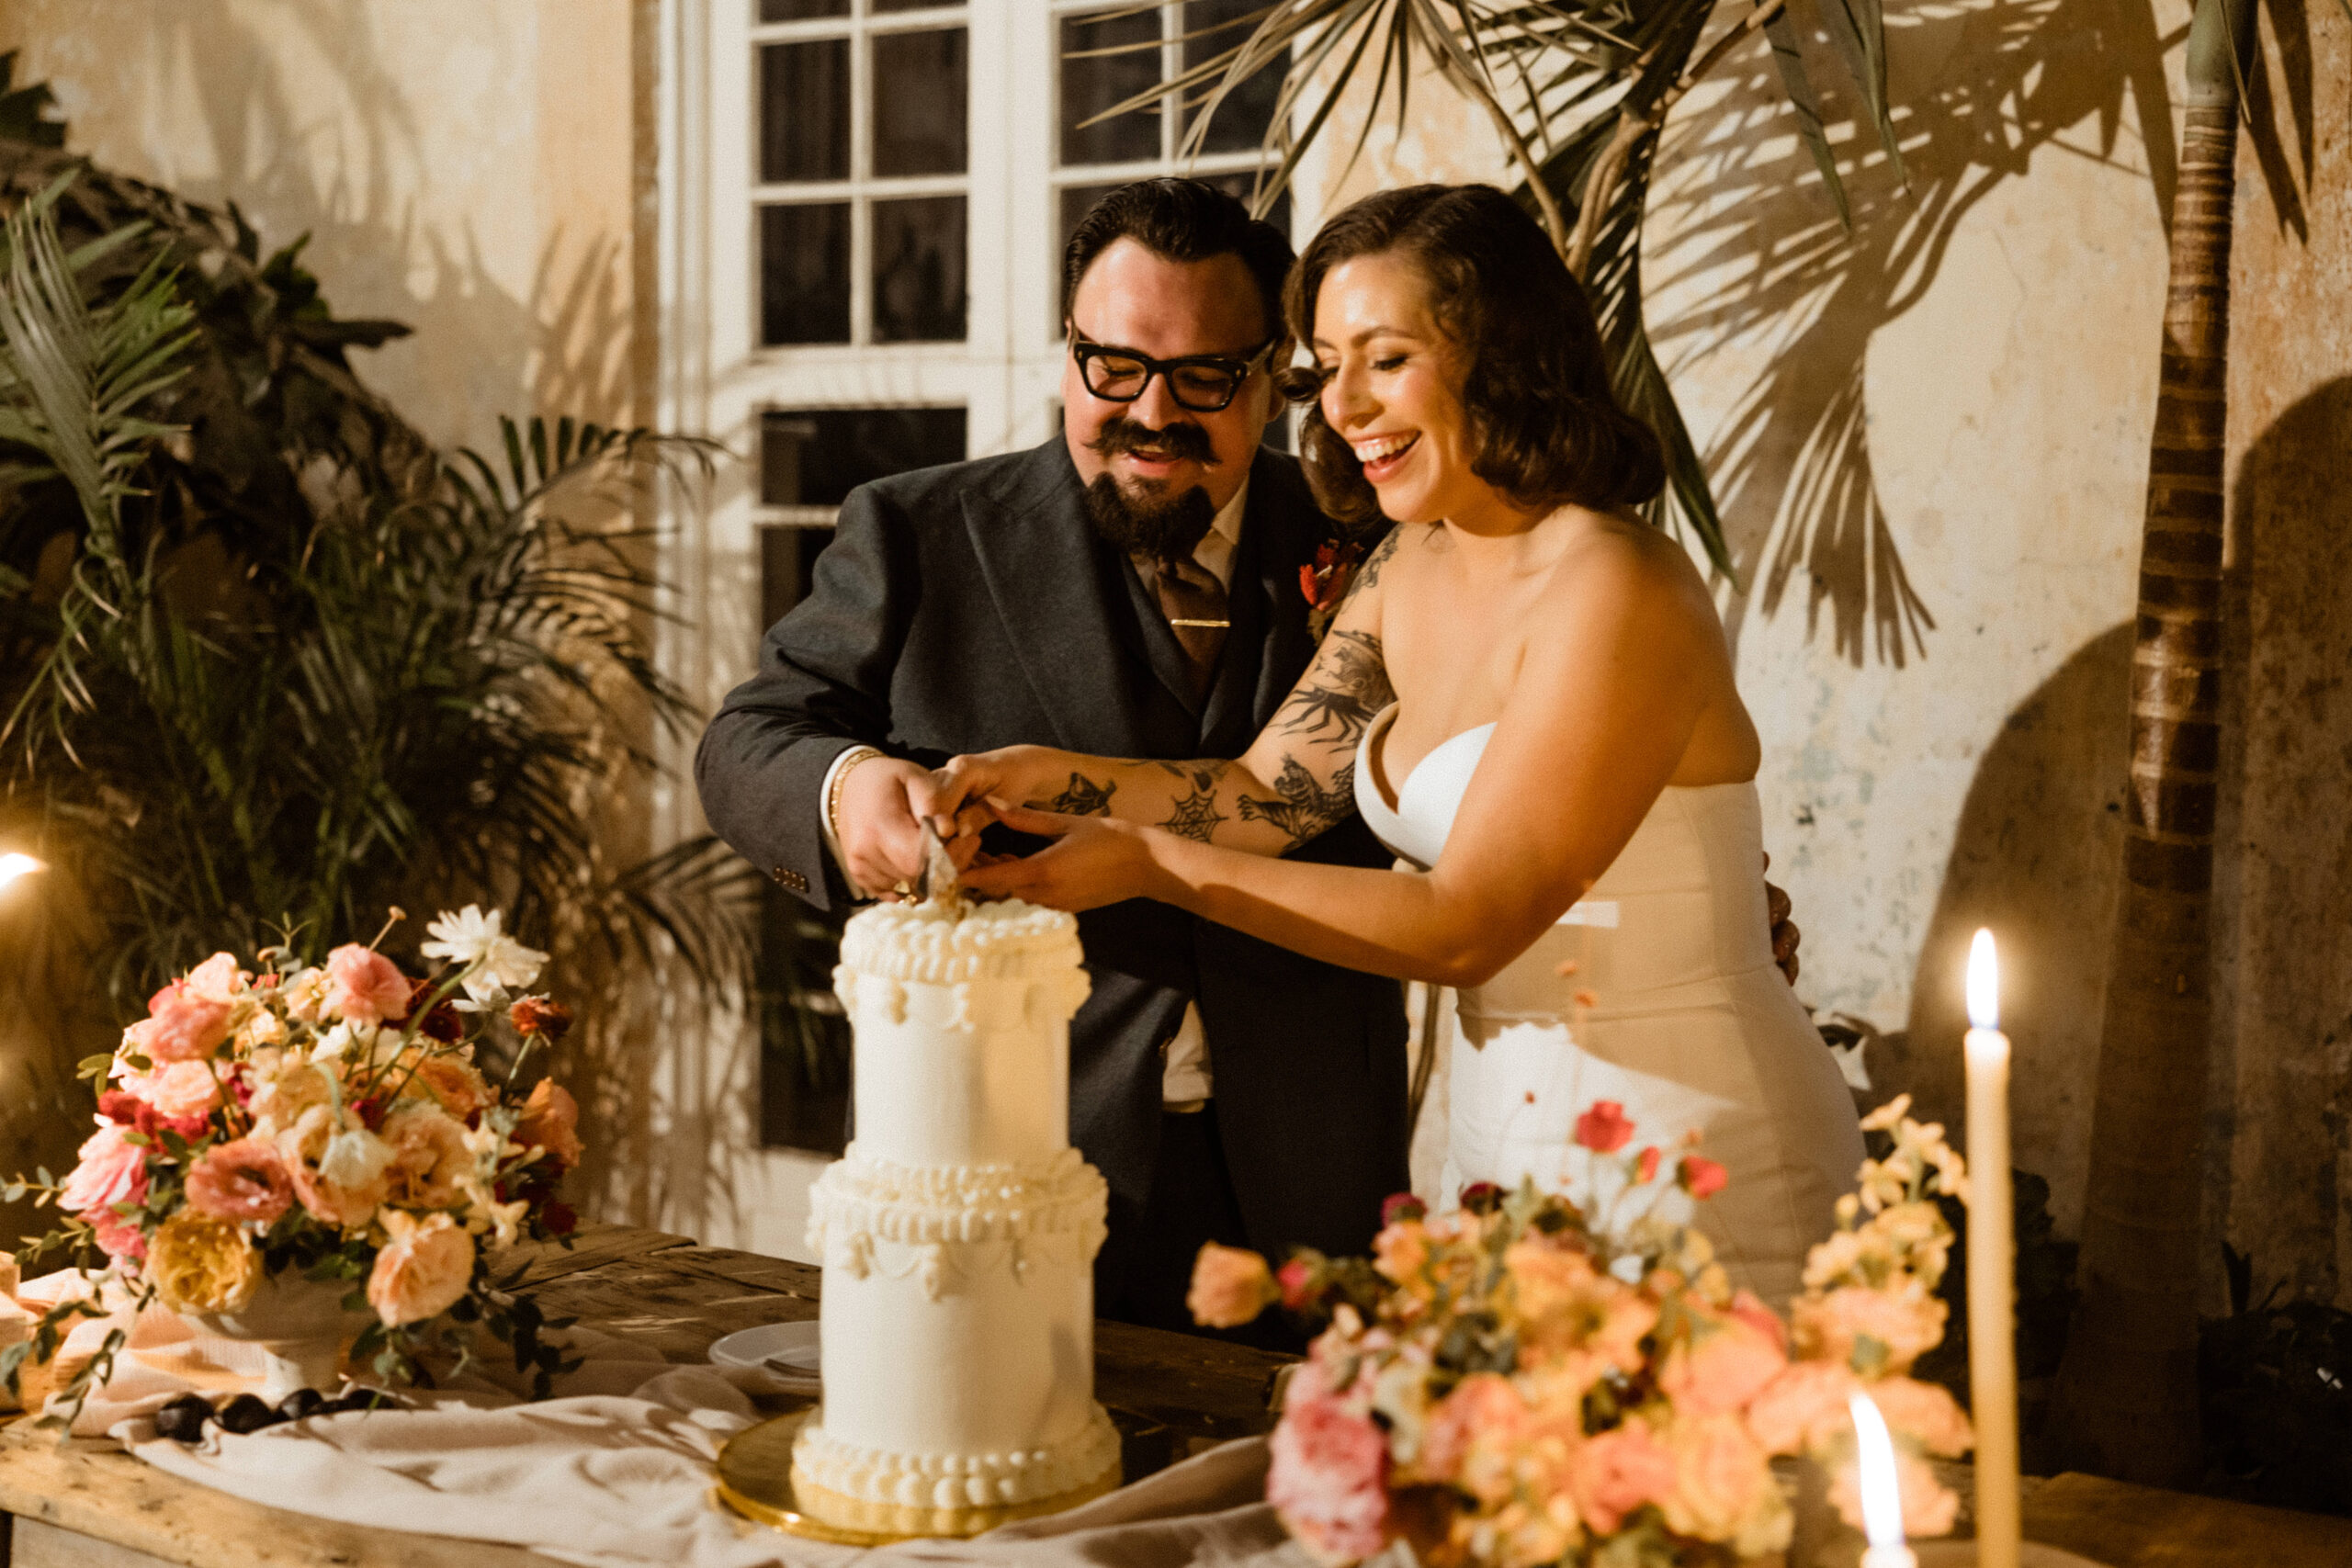 Stunning bride and groom cut their cake together at their Sobremesa Mexico destination wedding